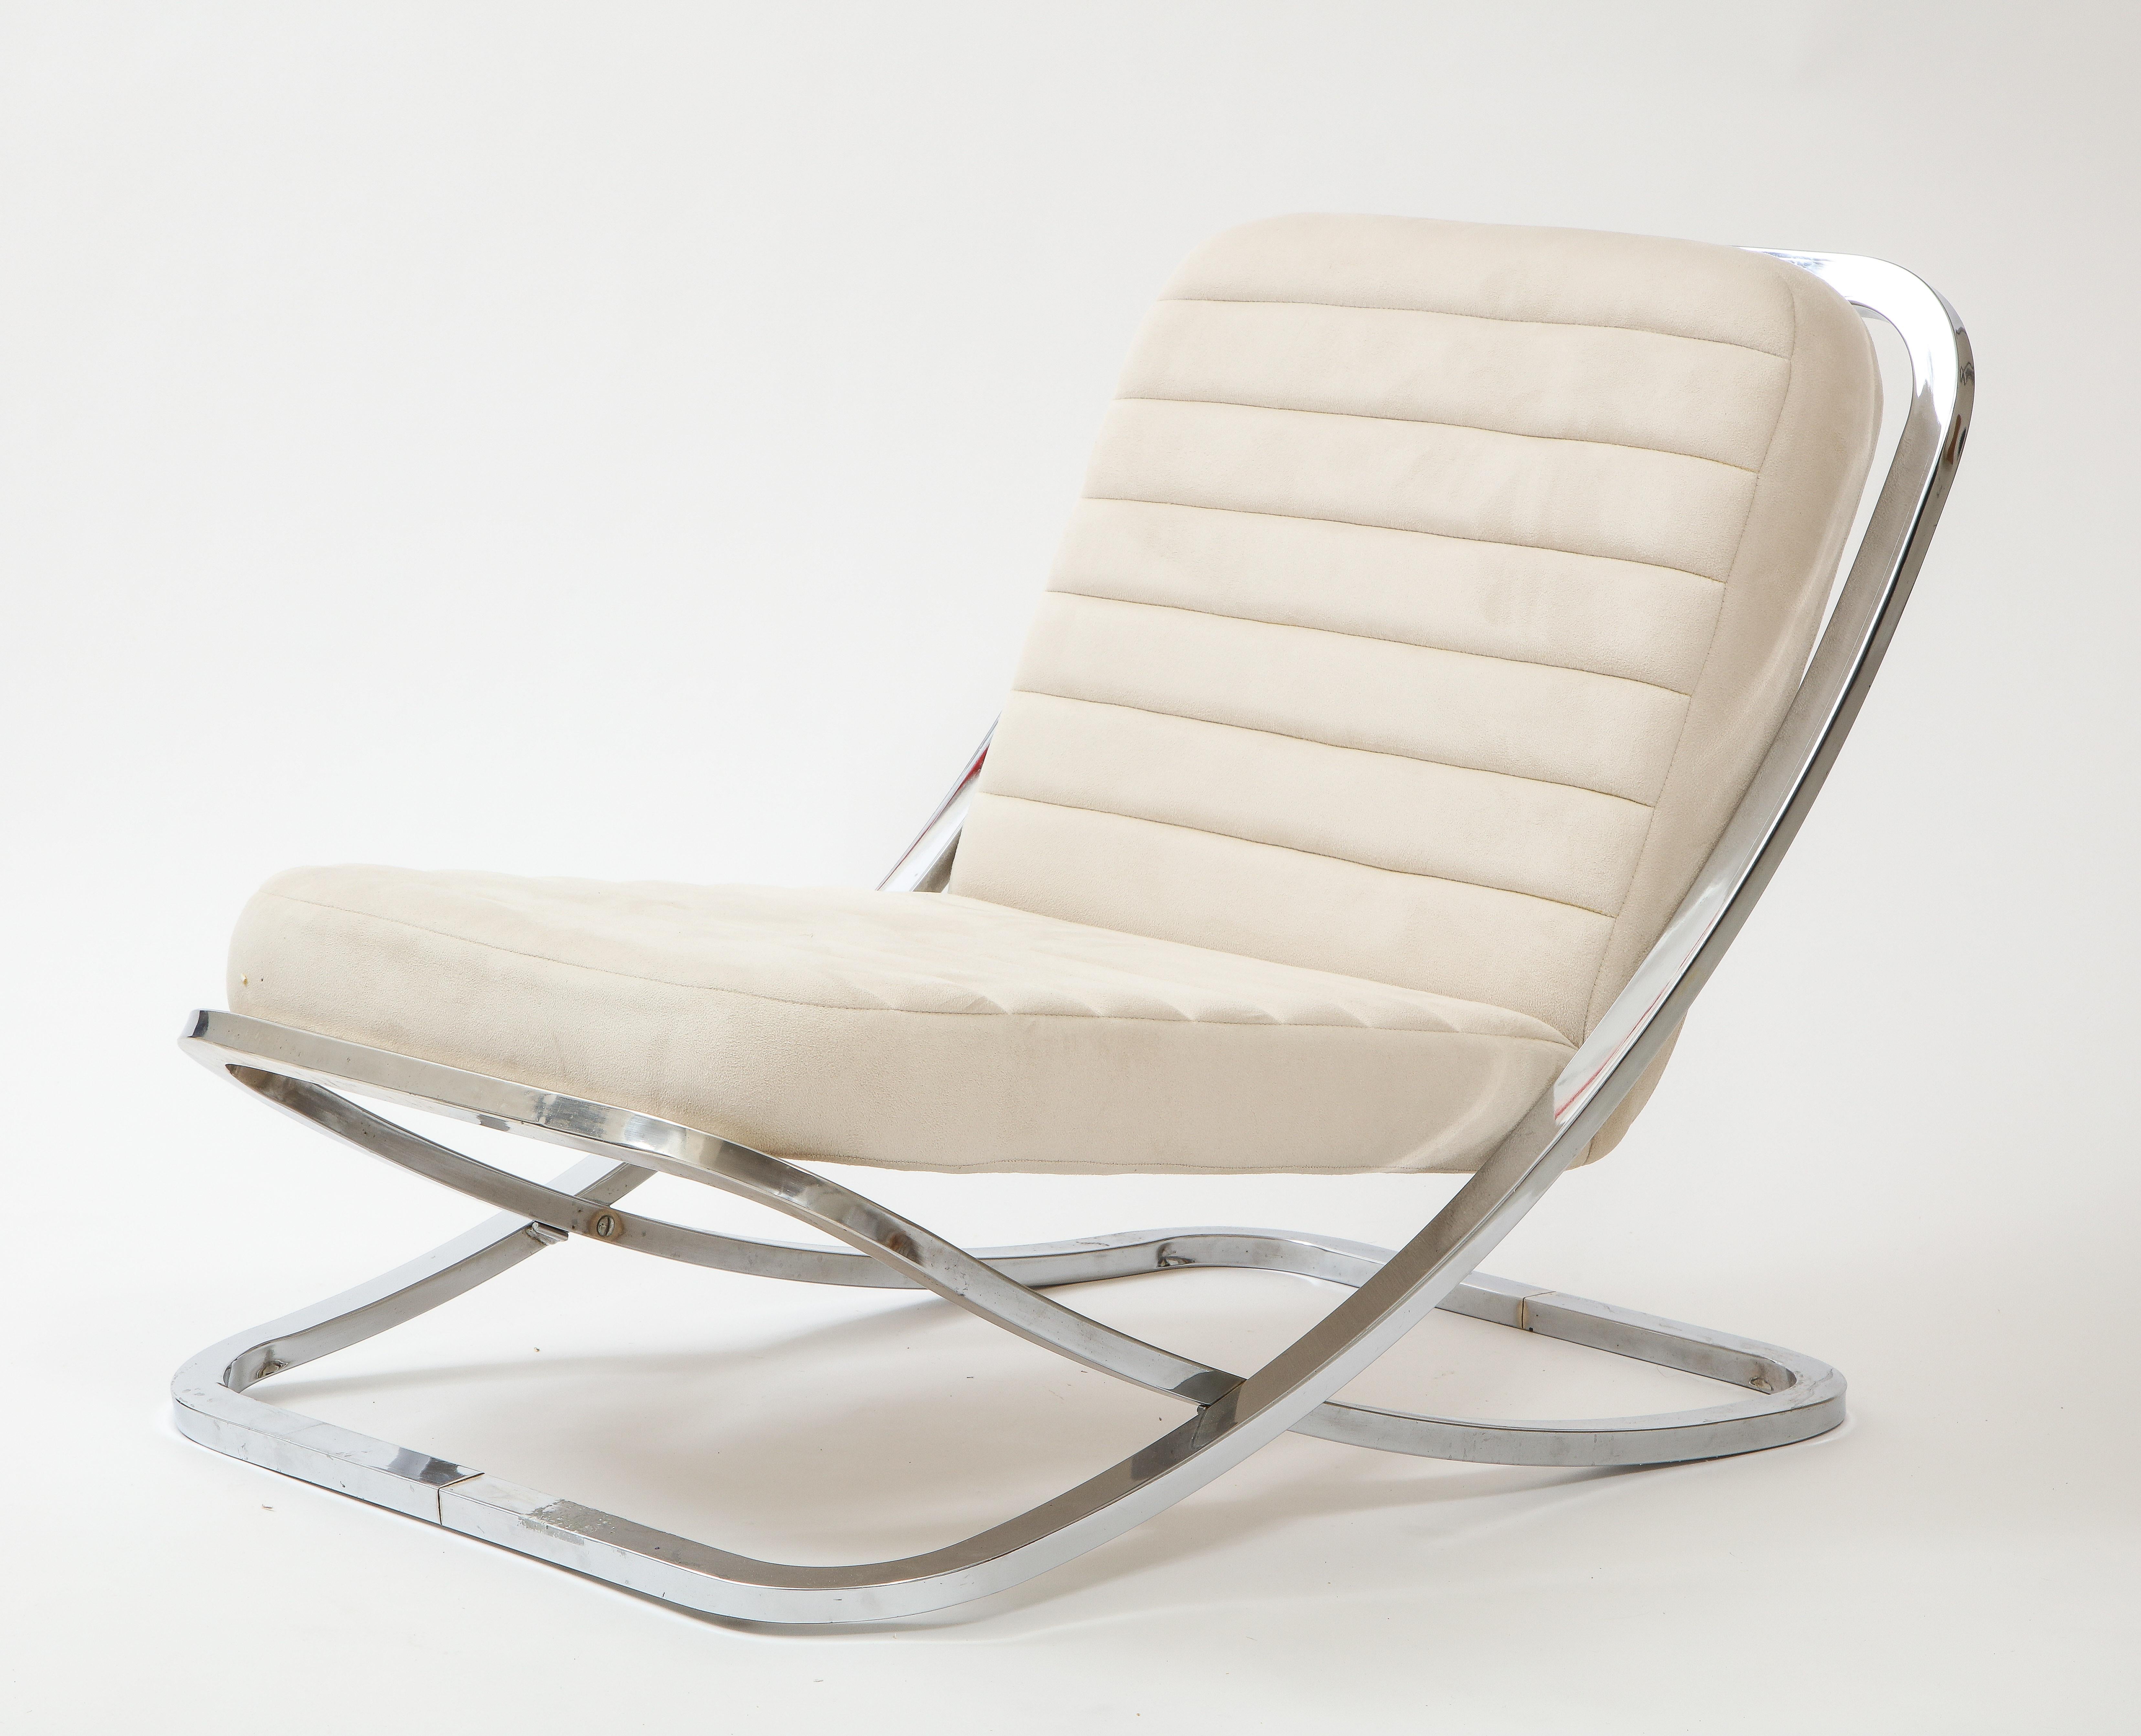 Pair of lovely chic polished chrome lounge chair covered in a white ultra suede fabric.
These are low to the ground and would be amazing for a conversation pit or any low key area such as children’s room etc.
Modern Space Age style
Measures: Height